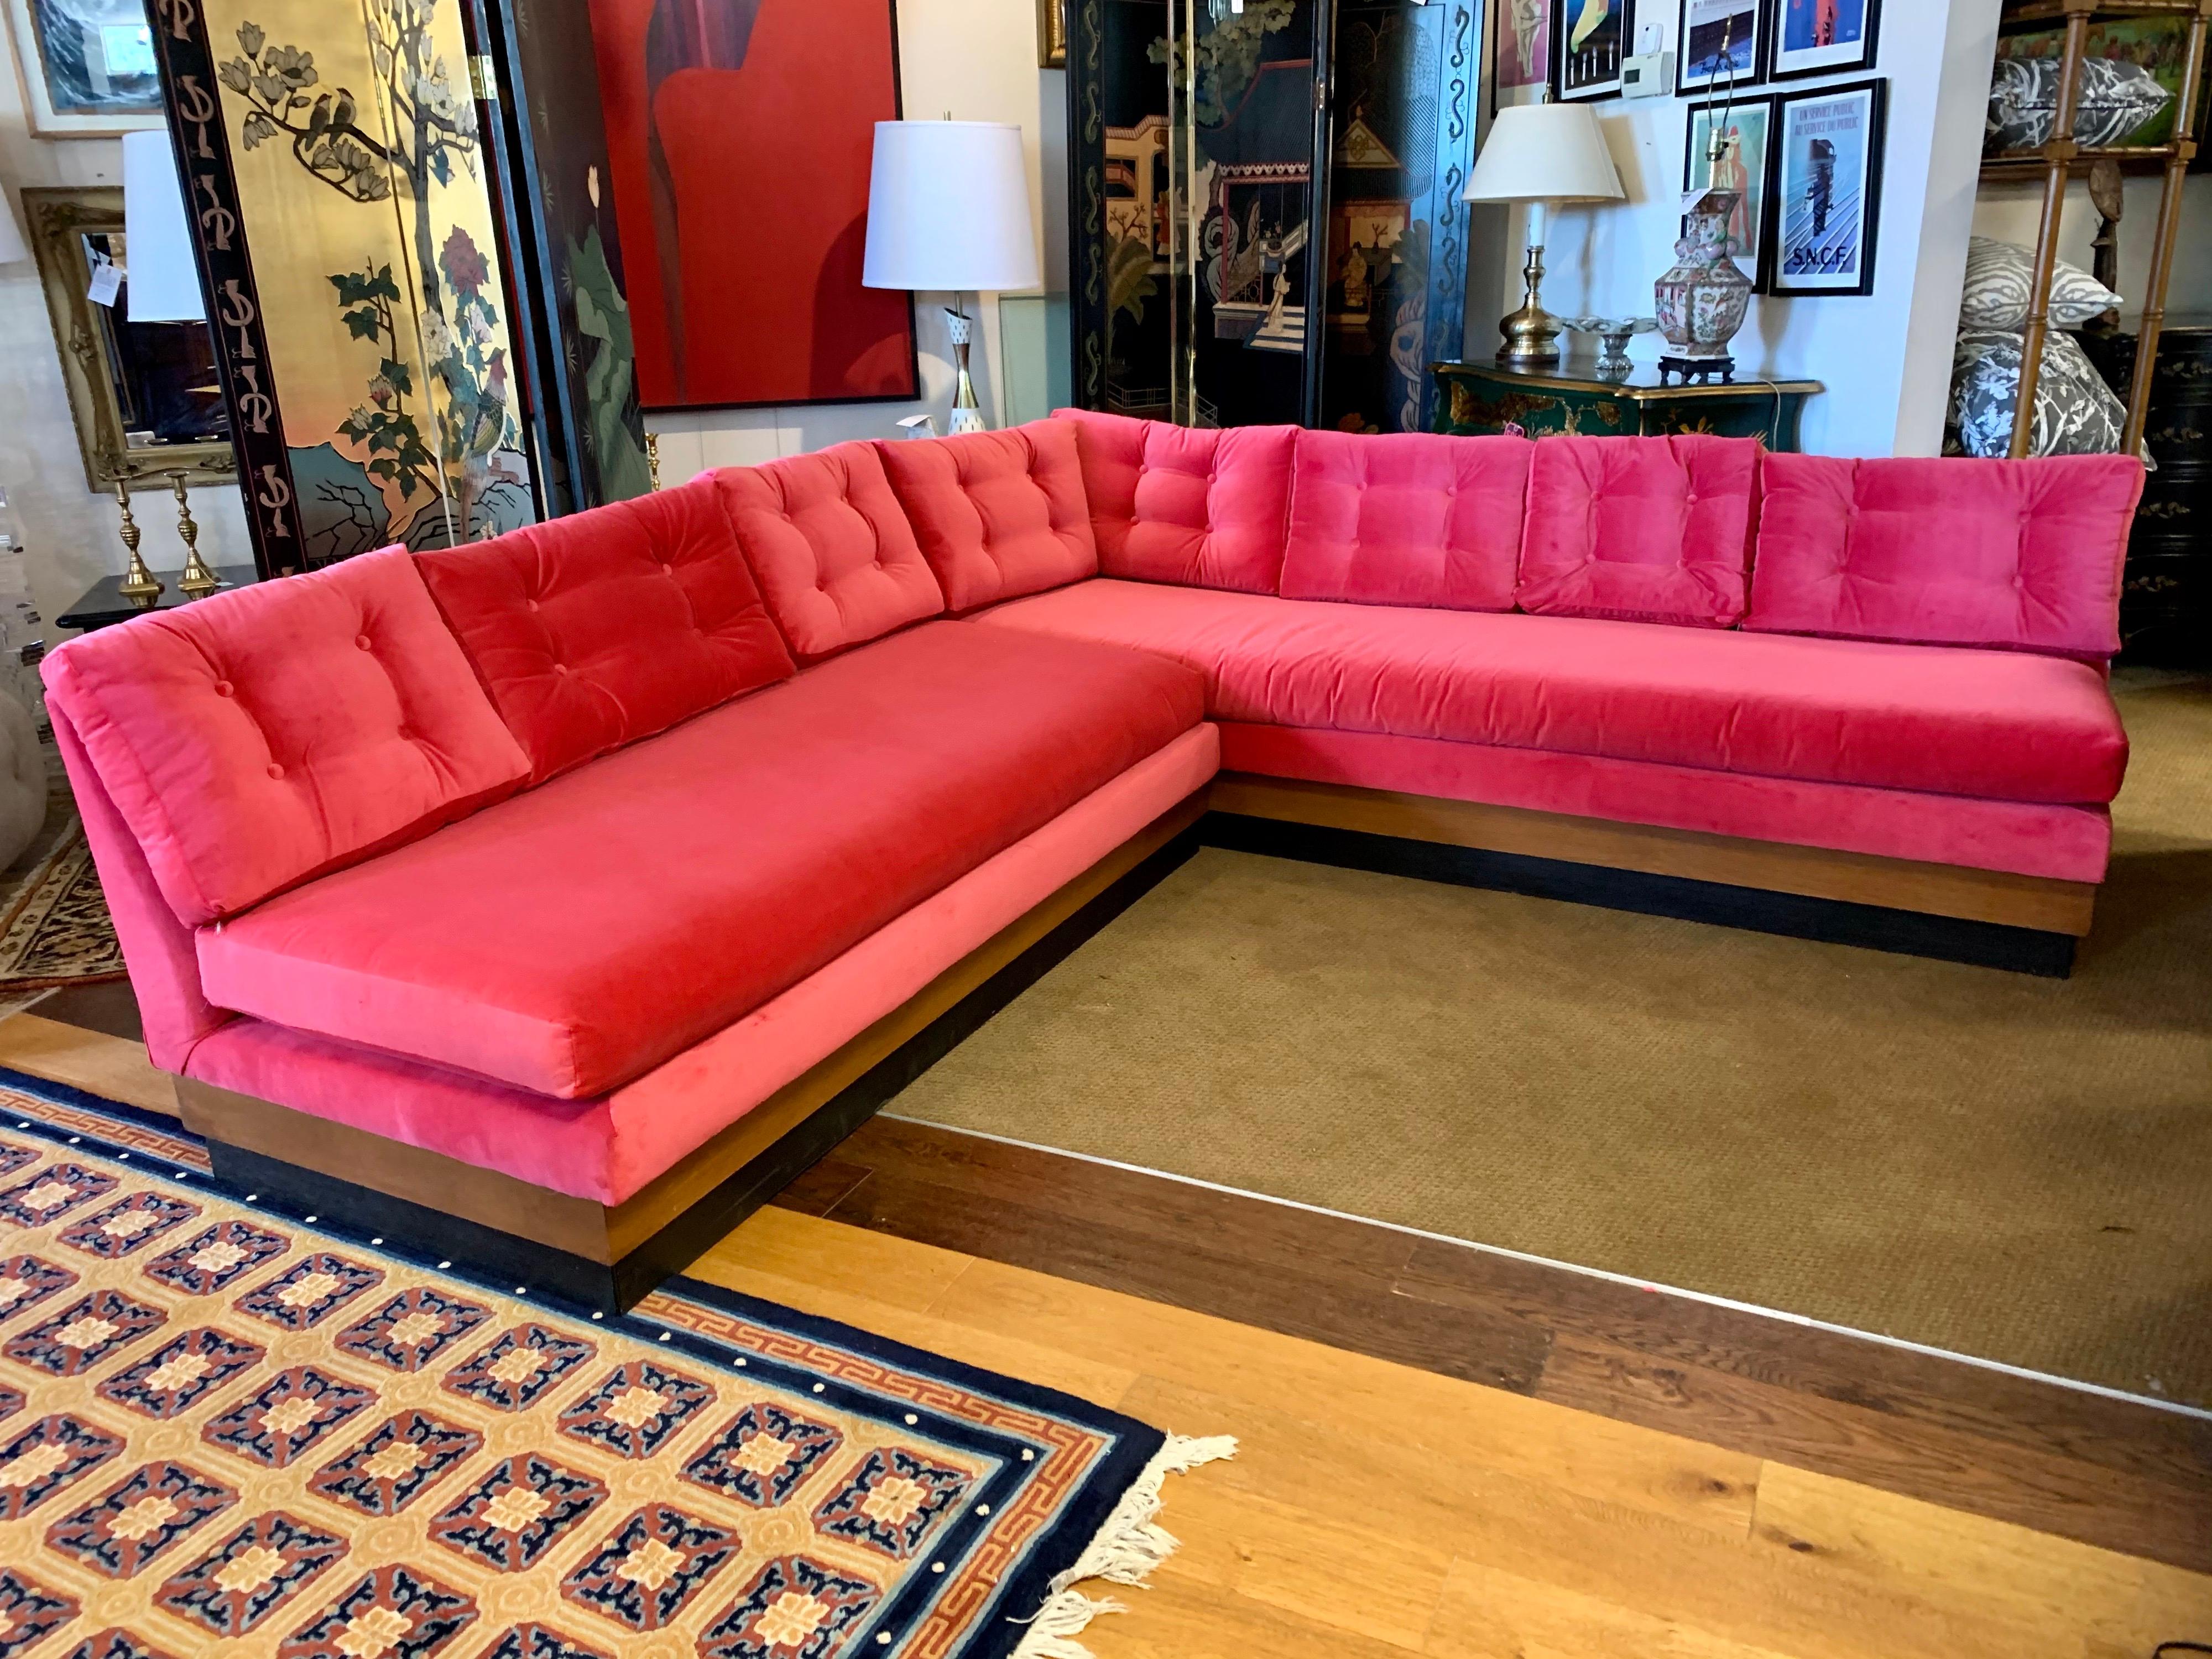 Authentic Adrian Pearsall pieces are some of his most dramatic creations. They also need space!

Magnificent and coveted signed Adrian Pearsall for Craft Associates sofa with walnut floating plinth extending all around. It has been newly